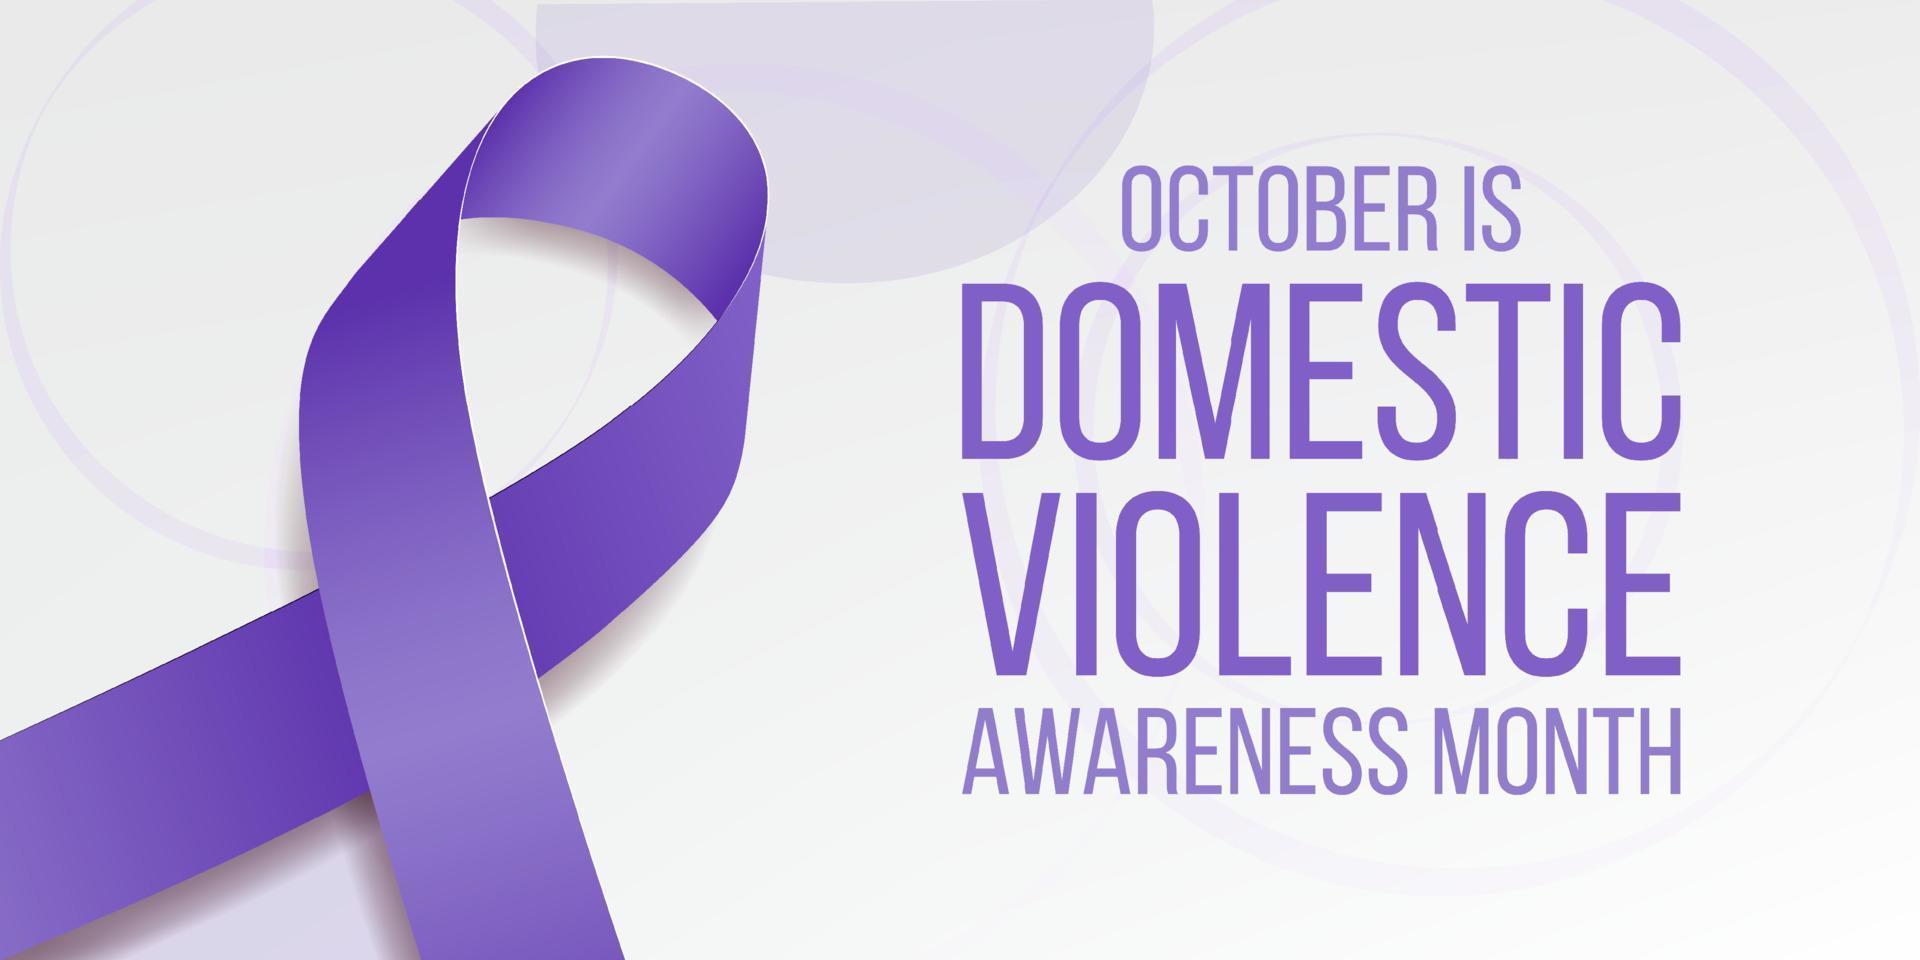 Domestic Violence Awareness Month concept.  Banner for with  purple ribbon awareness and text.  Vector illustration.